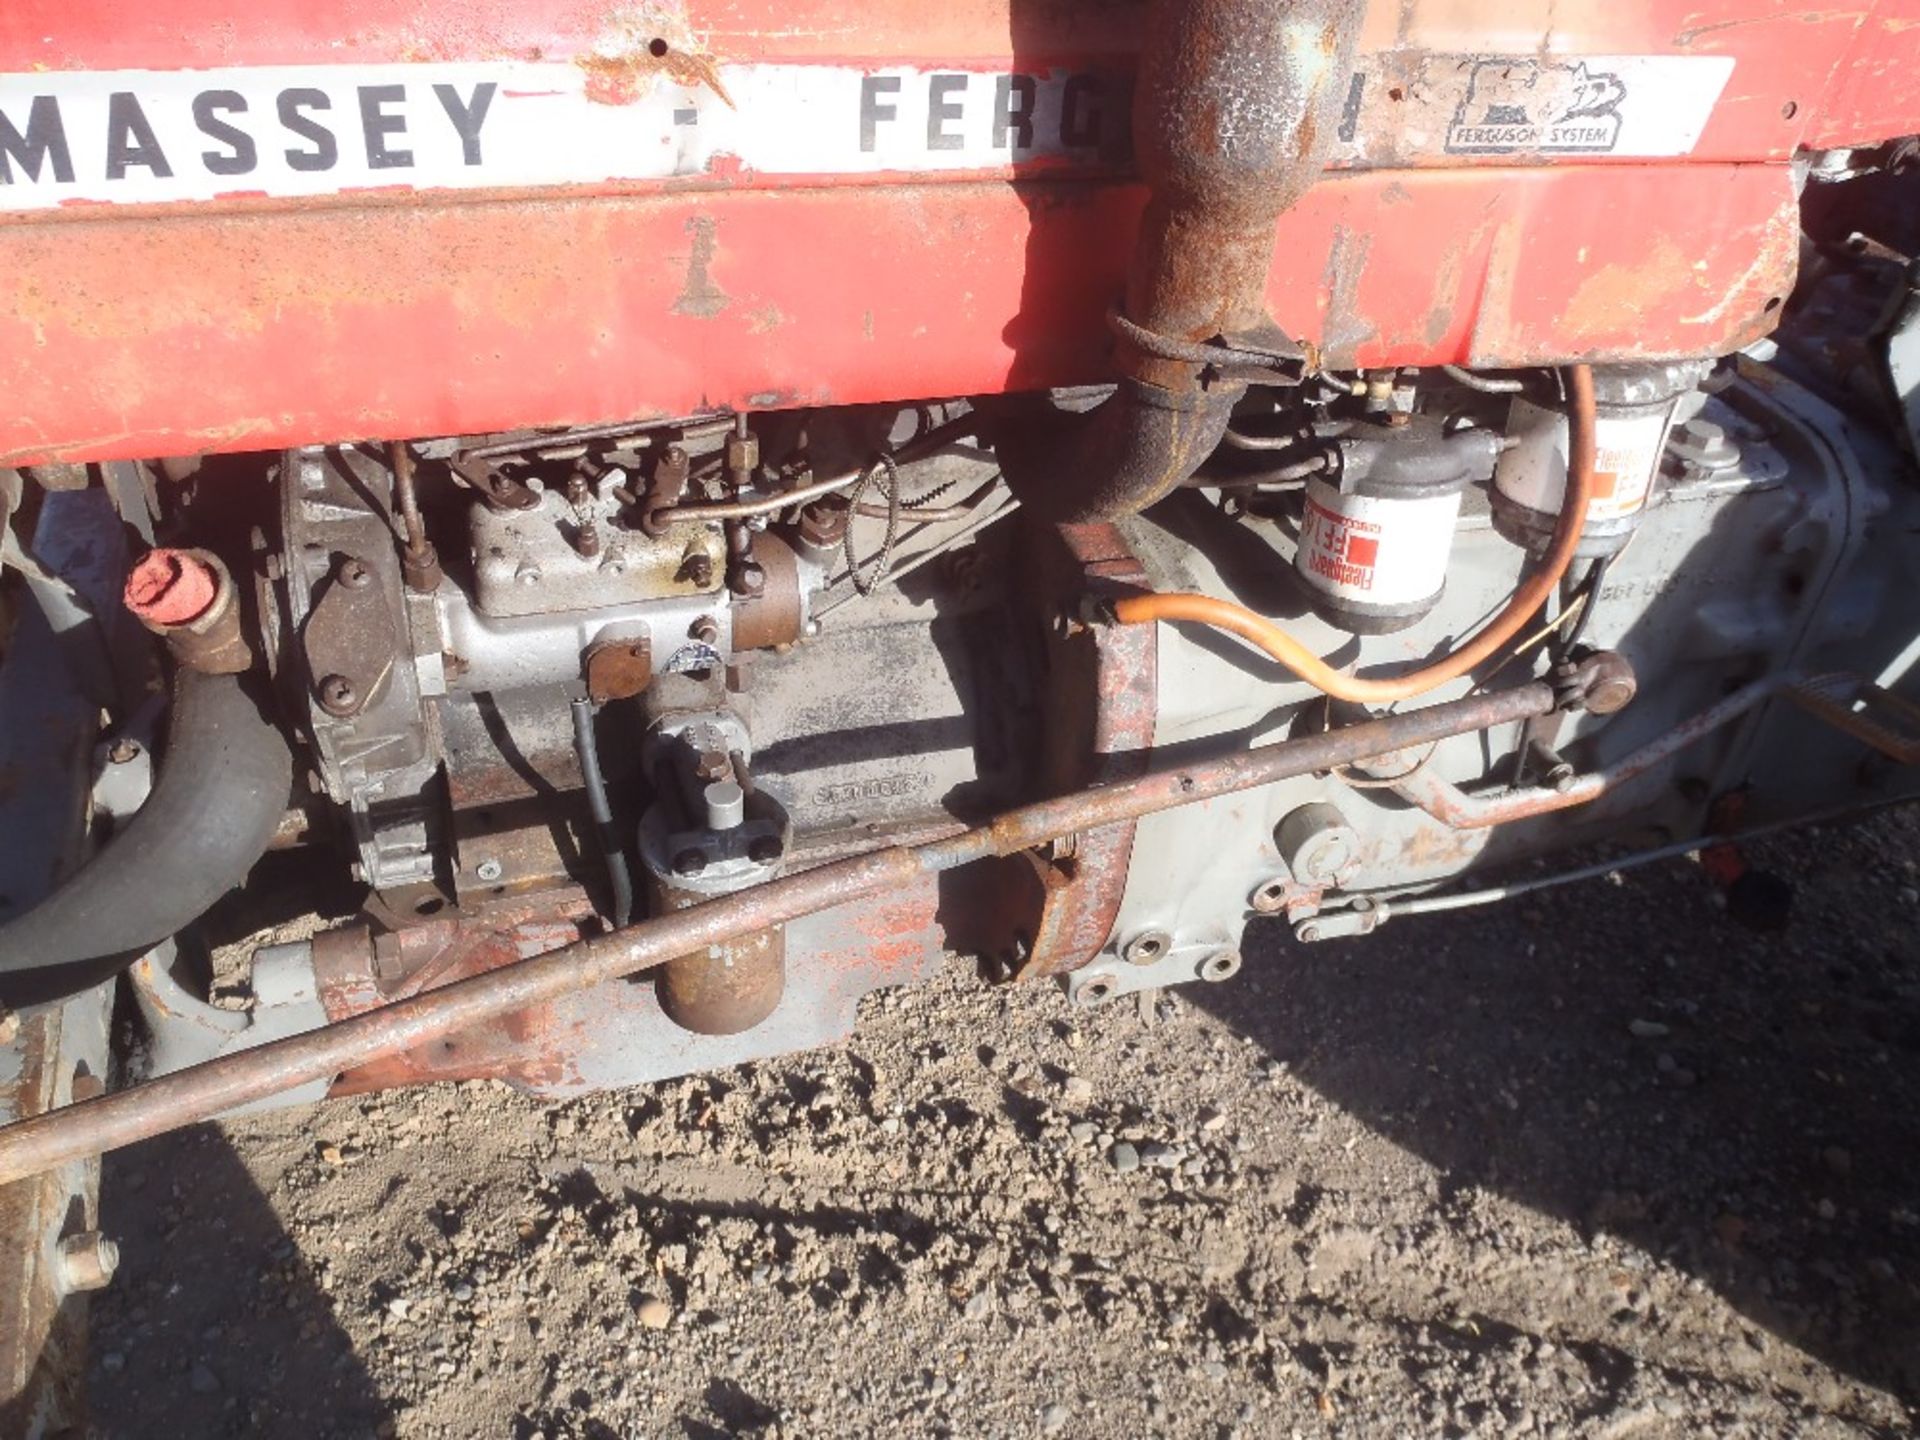 Massey Ferguson 135 Tractor with Long PTO Ser. No. 490675 - Image 7 of 8